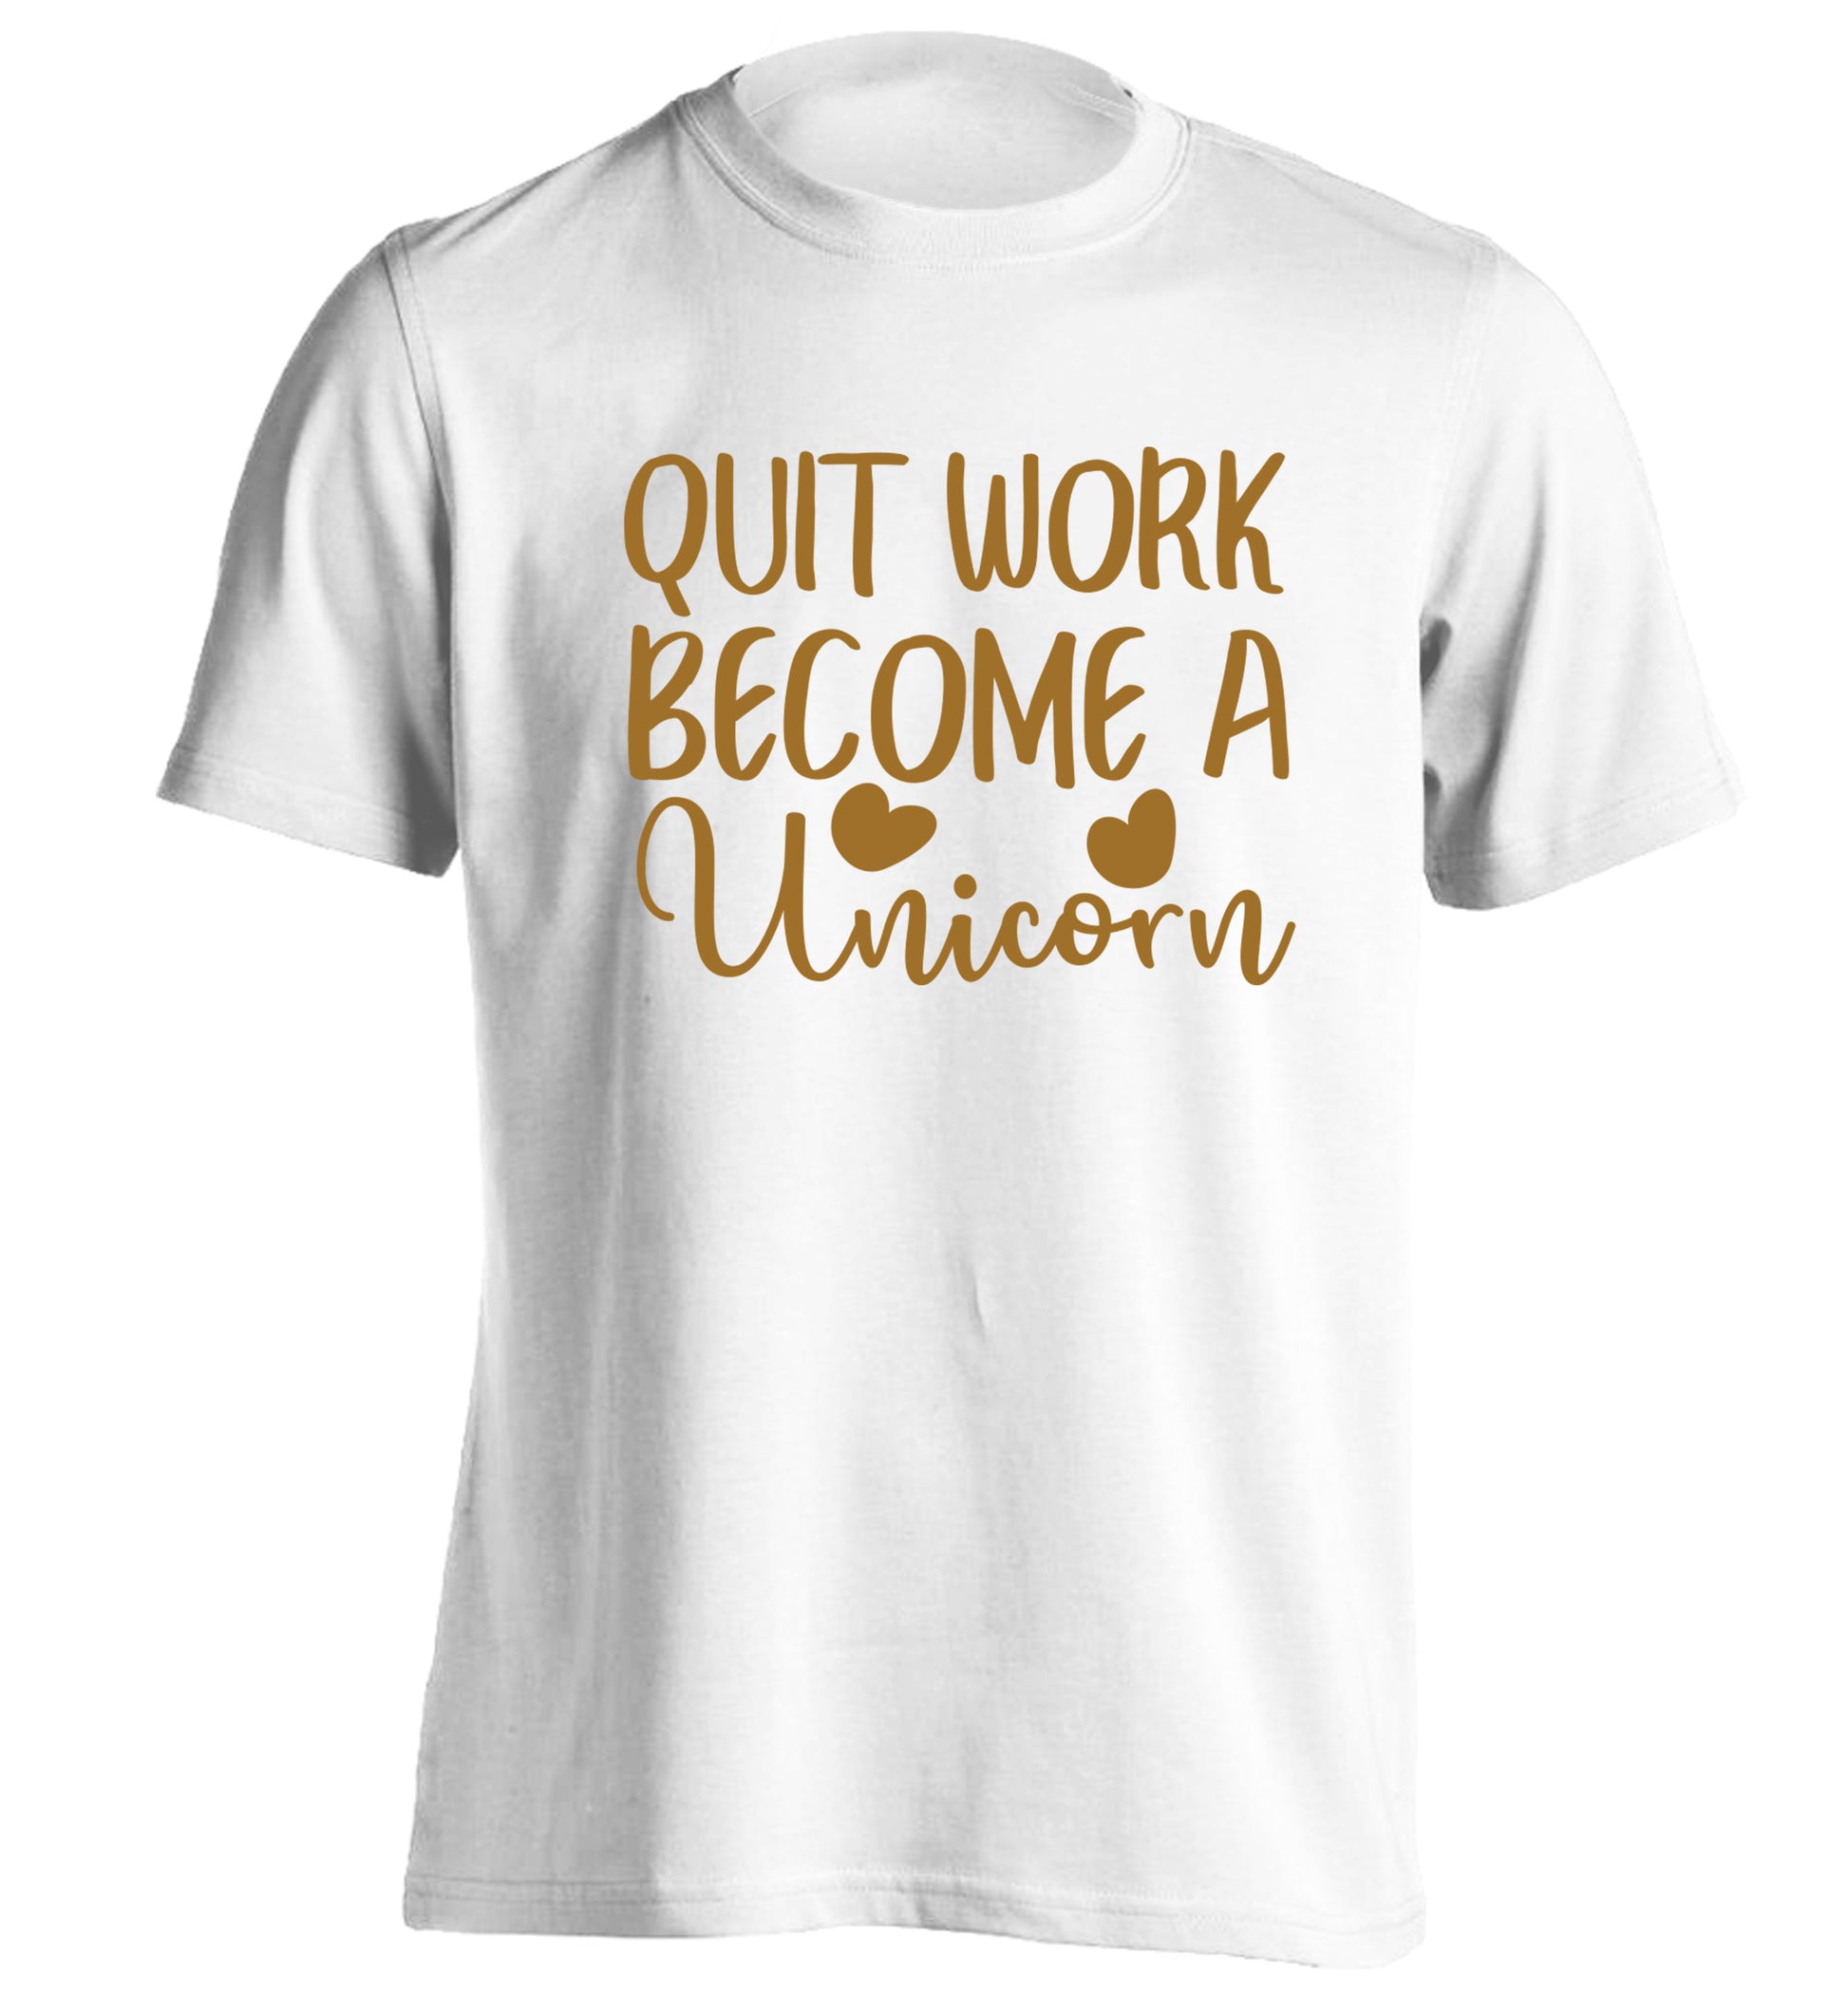 Quit work become a unicorn adults unisex white Tshirt 2XL